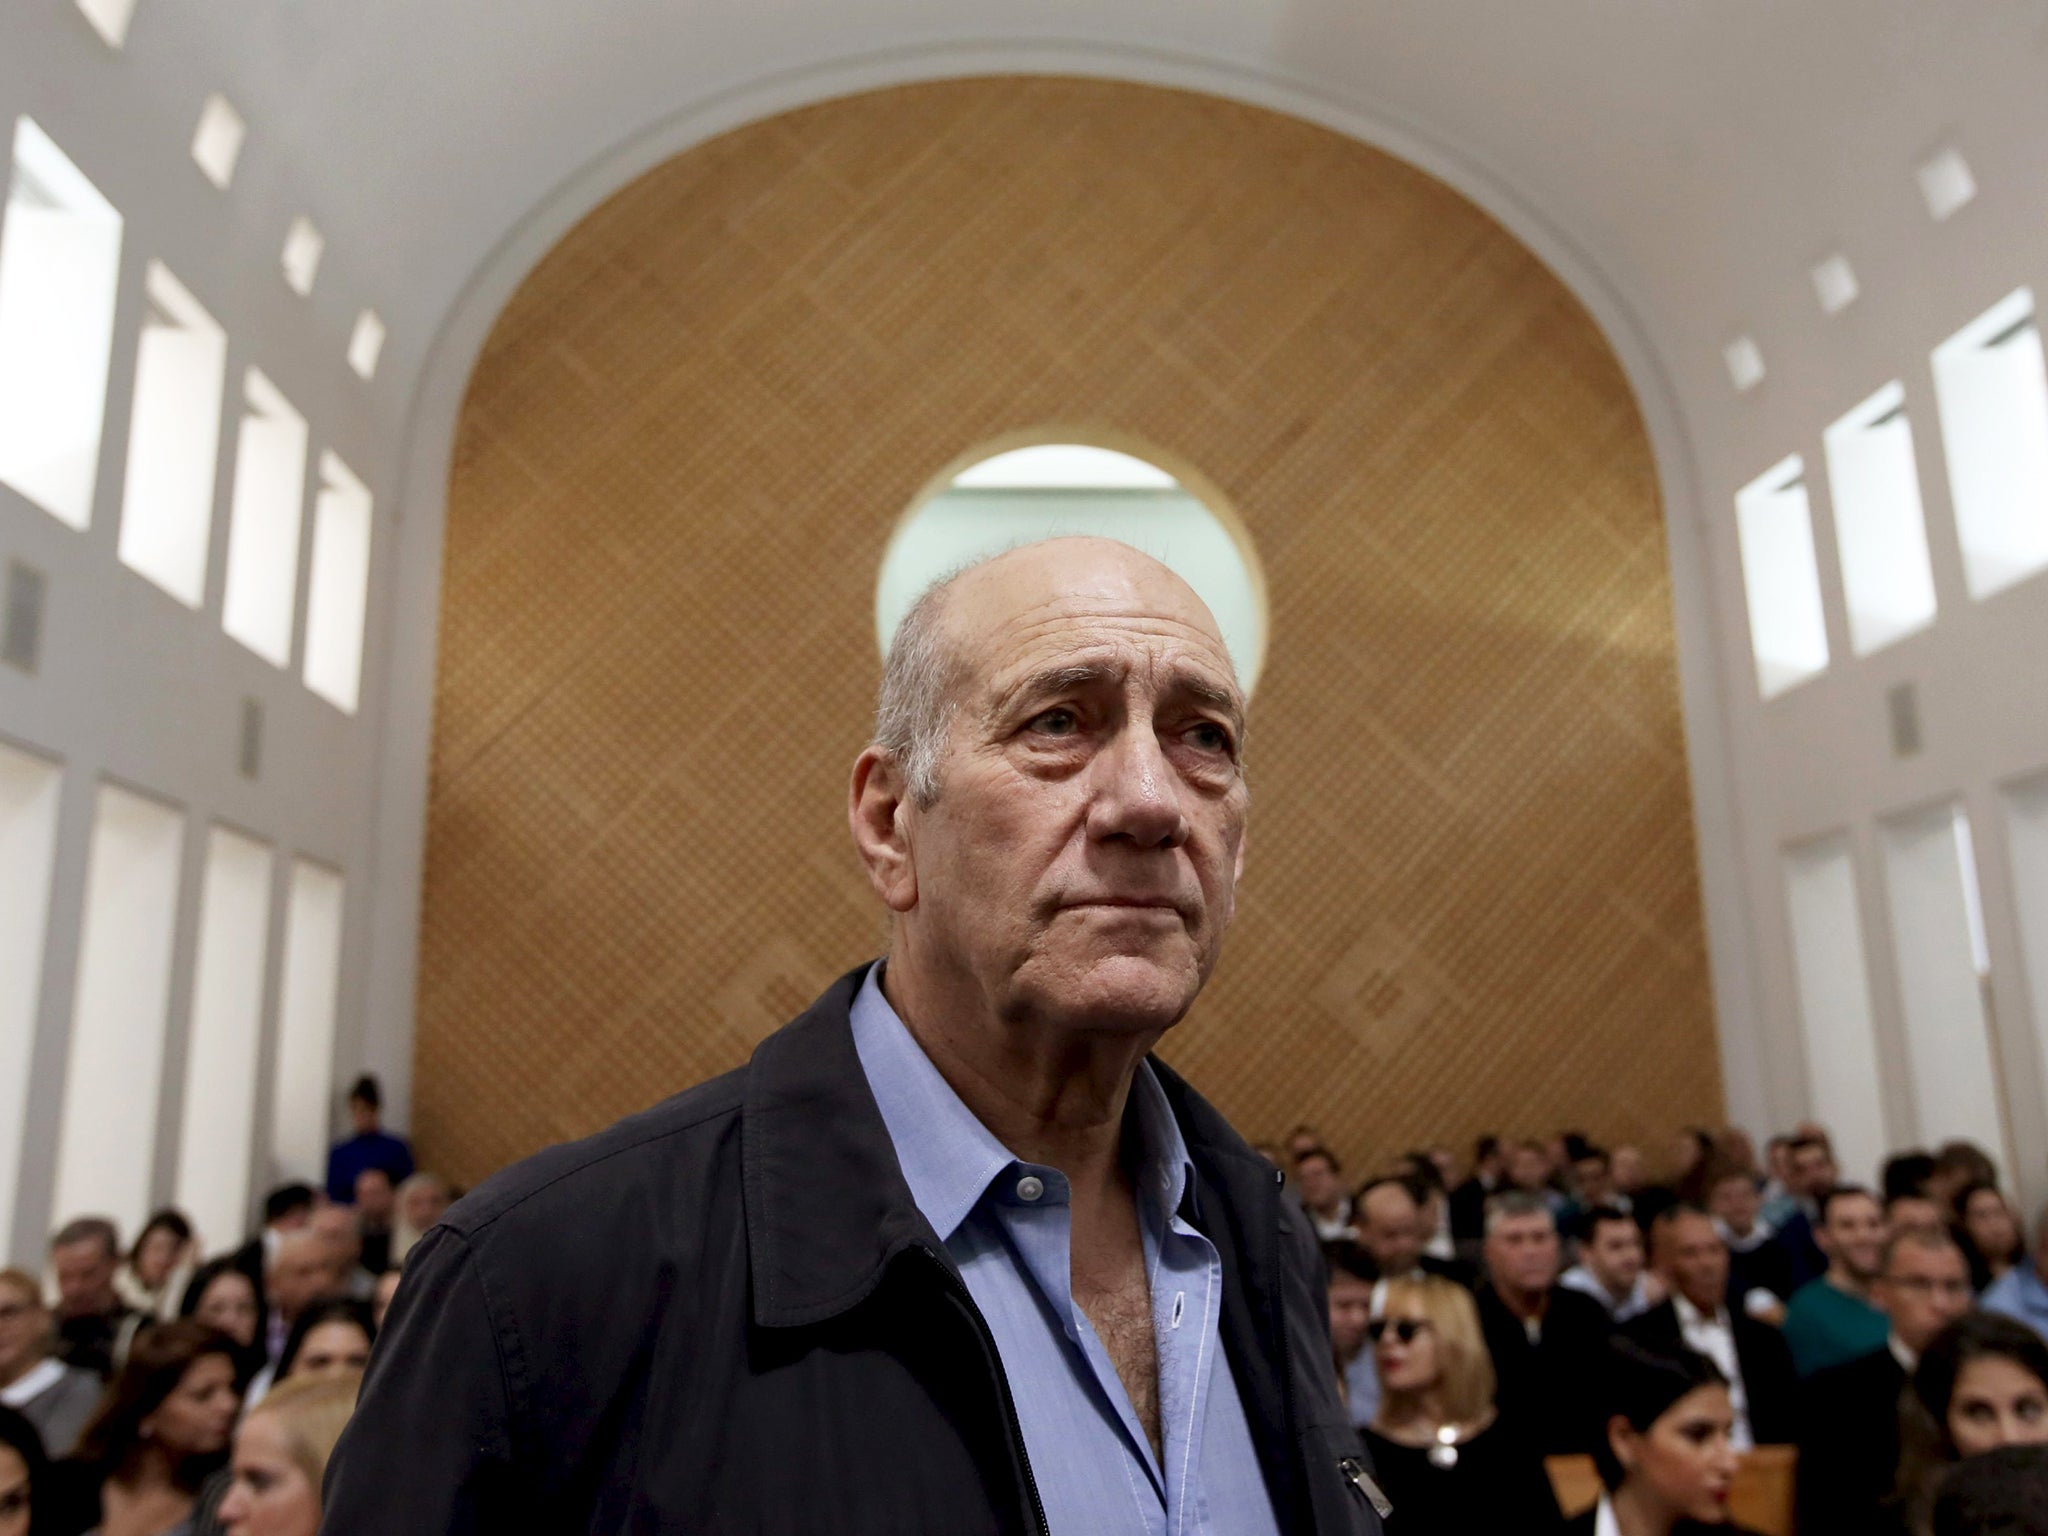 Olmert was sent to prison on corruption charges in 2014